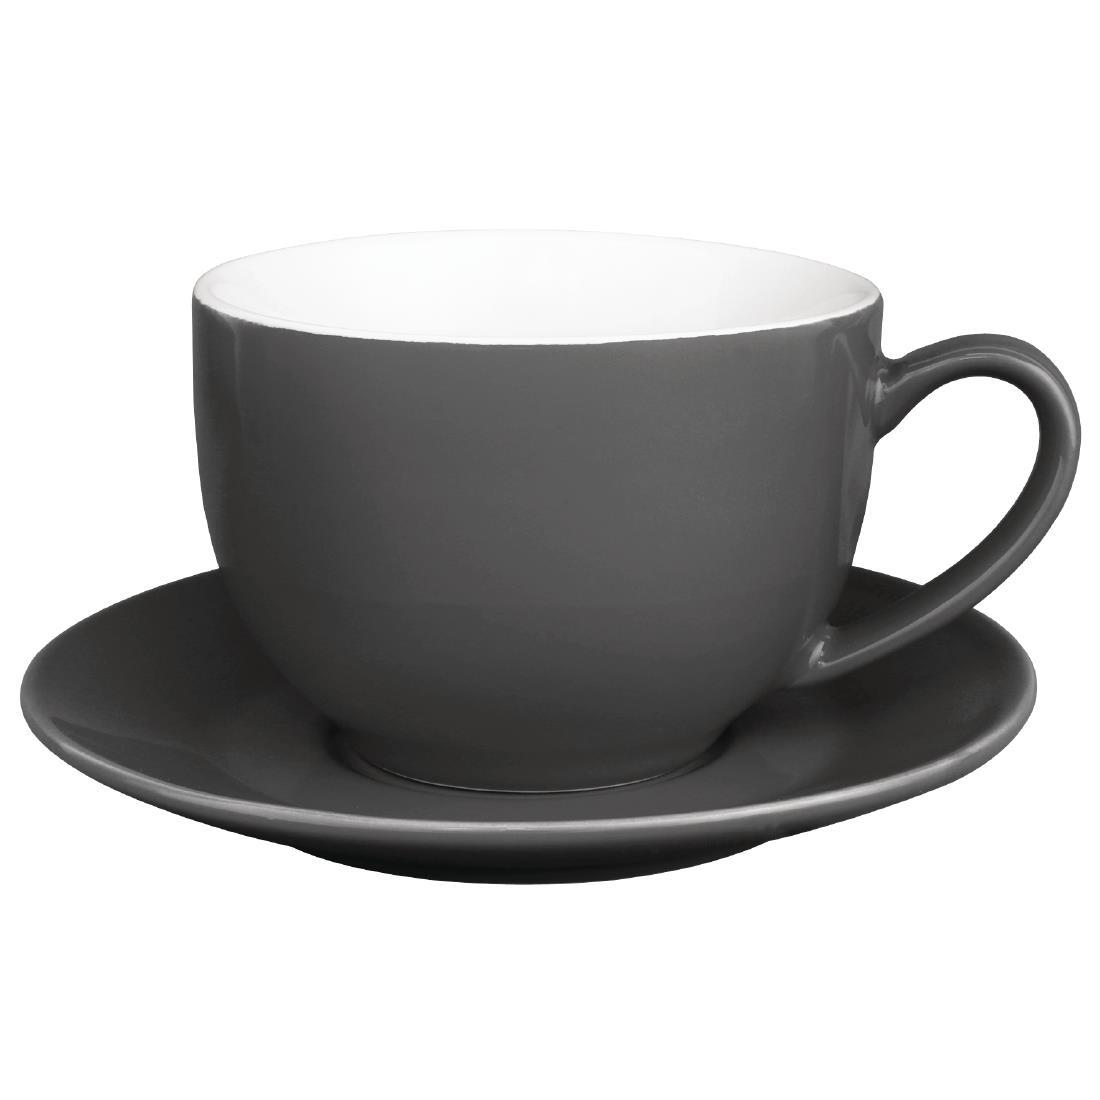 Olympia Cafe Saucers Charcoal 158mm (Pack of 12) - GL049  - 2